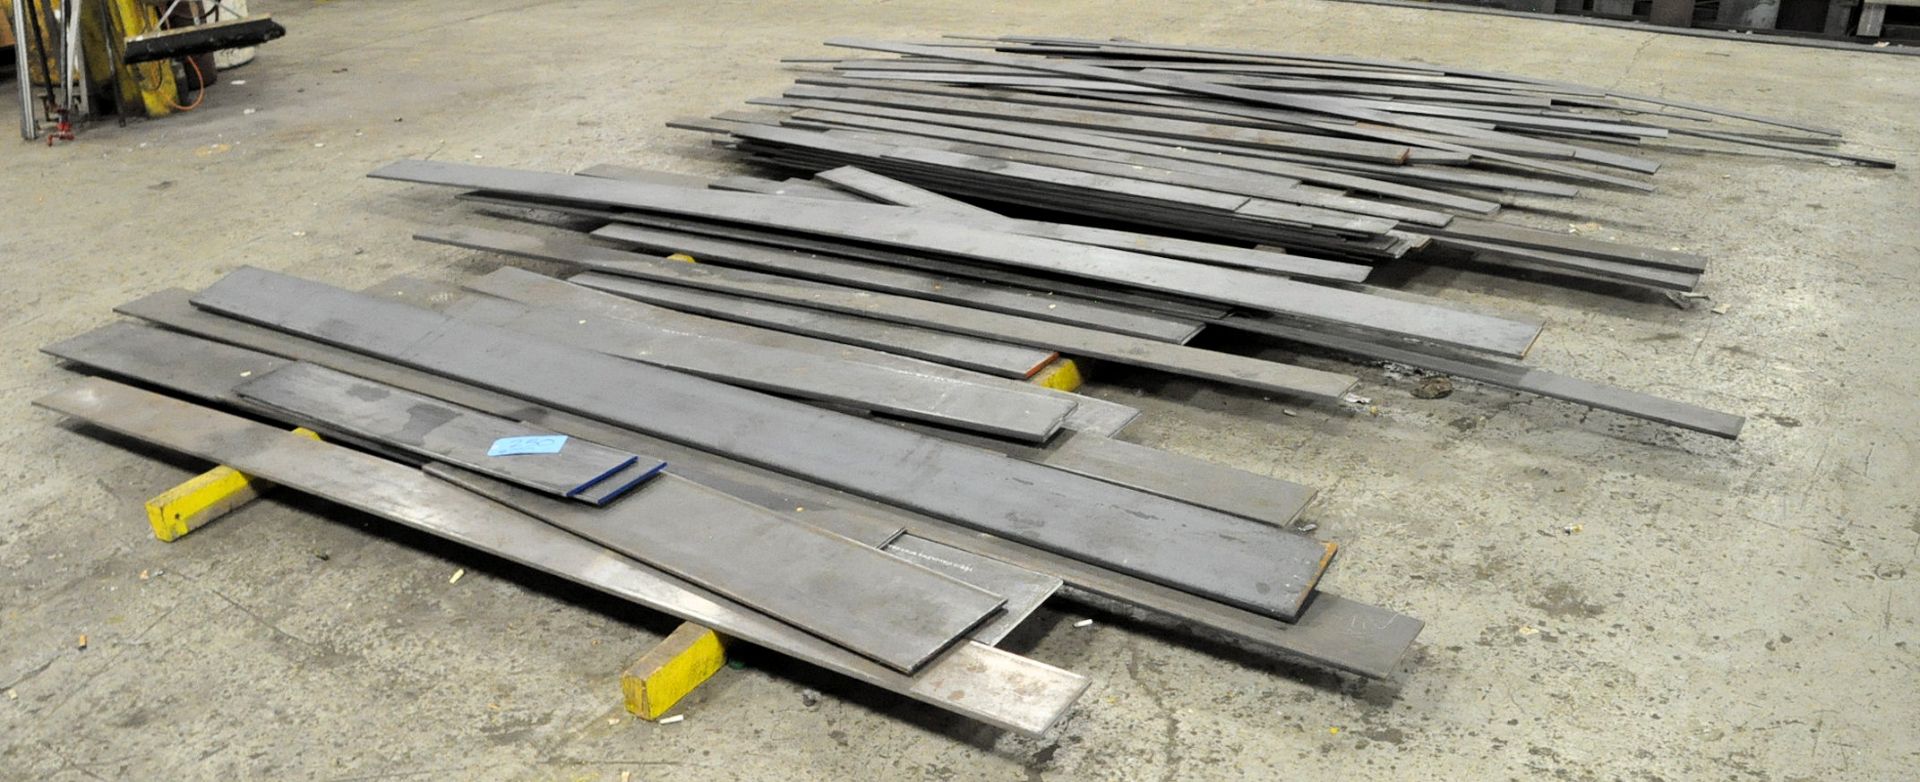 Lot-Flat Bar Steel Stock on Floor in (1) Group, Various Lengths and Widths